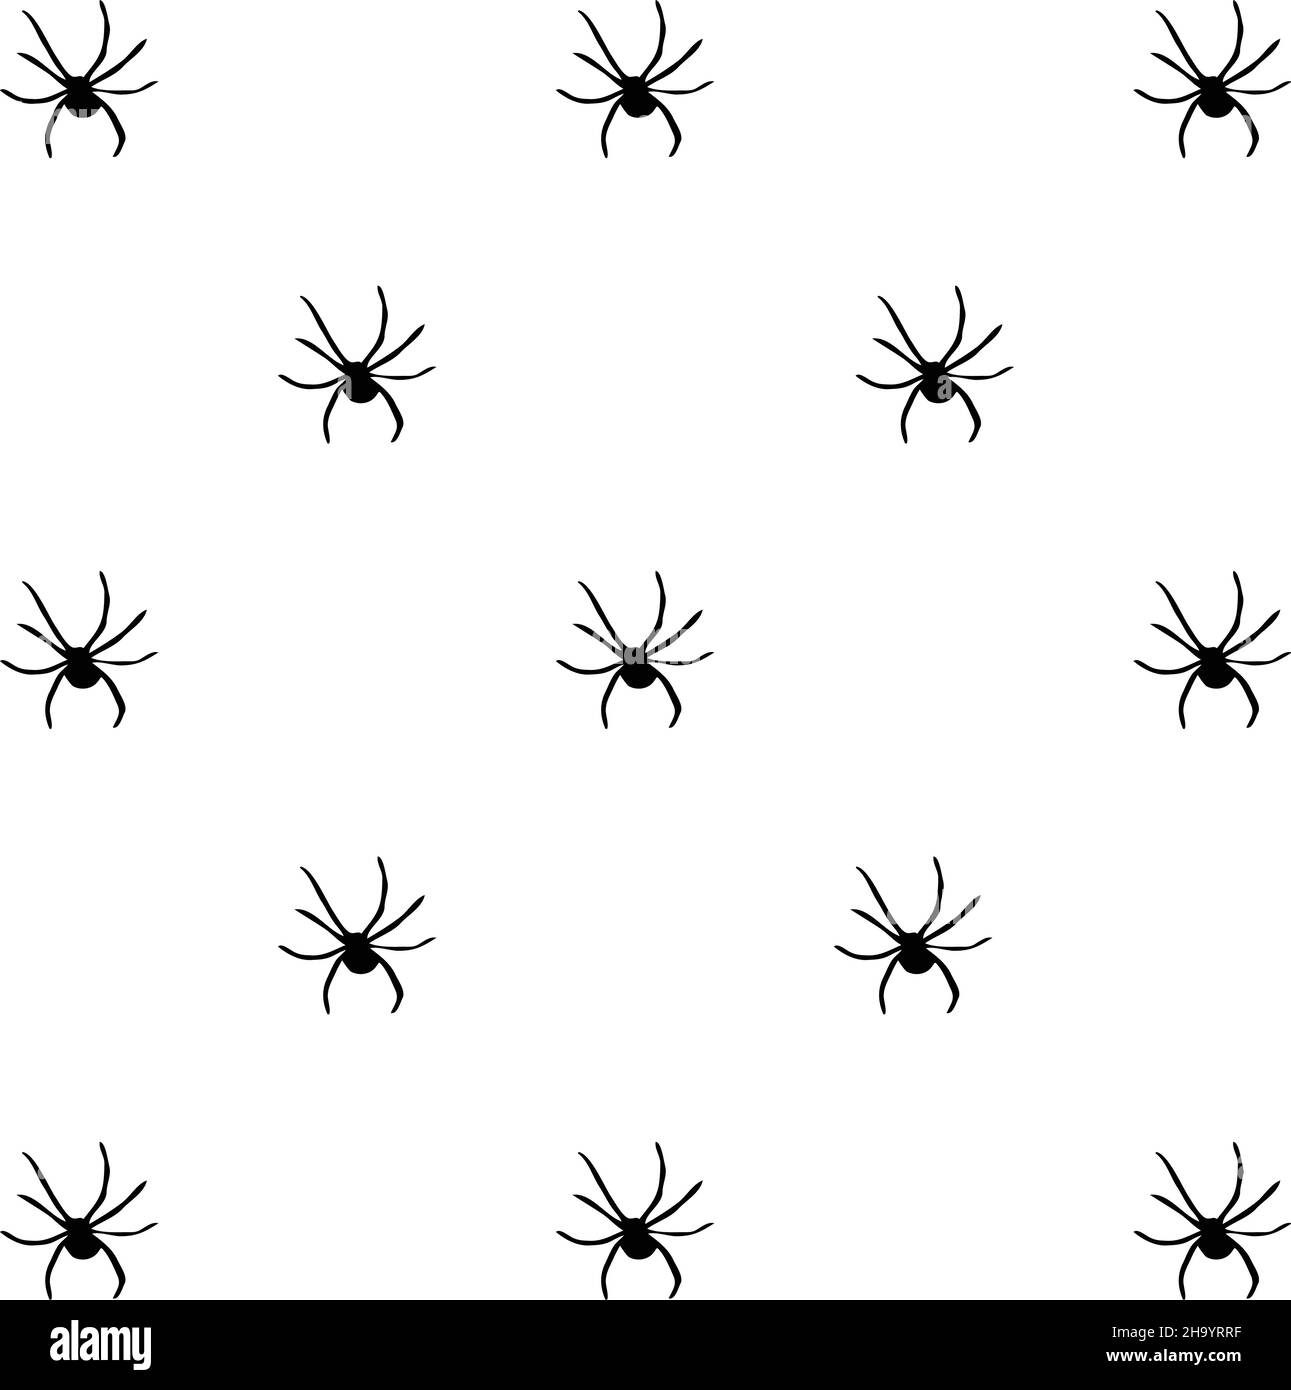 Black widow silhouette vector background poster tapete illustration Stock Vector